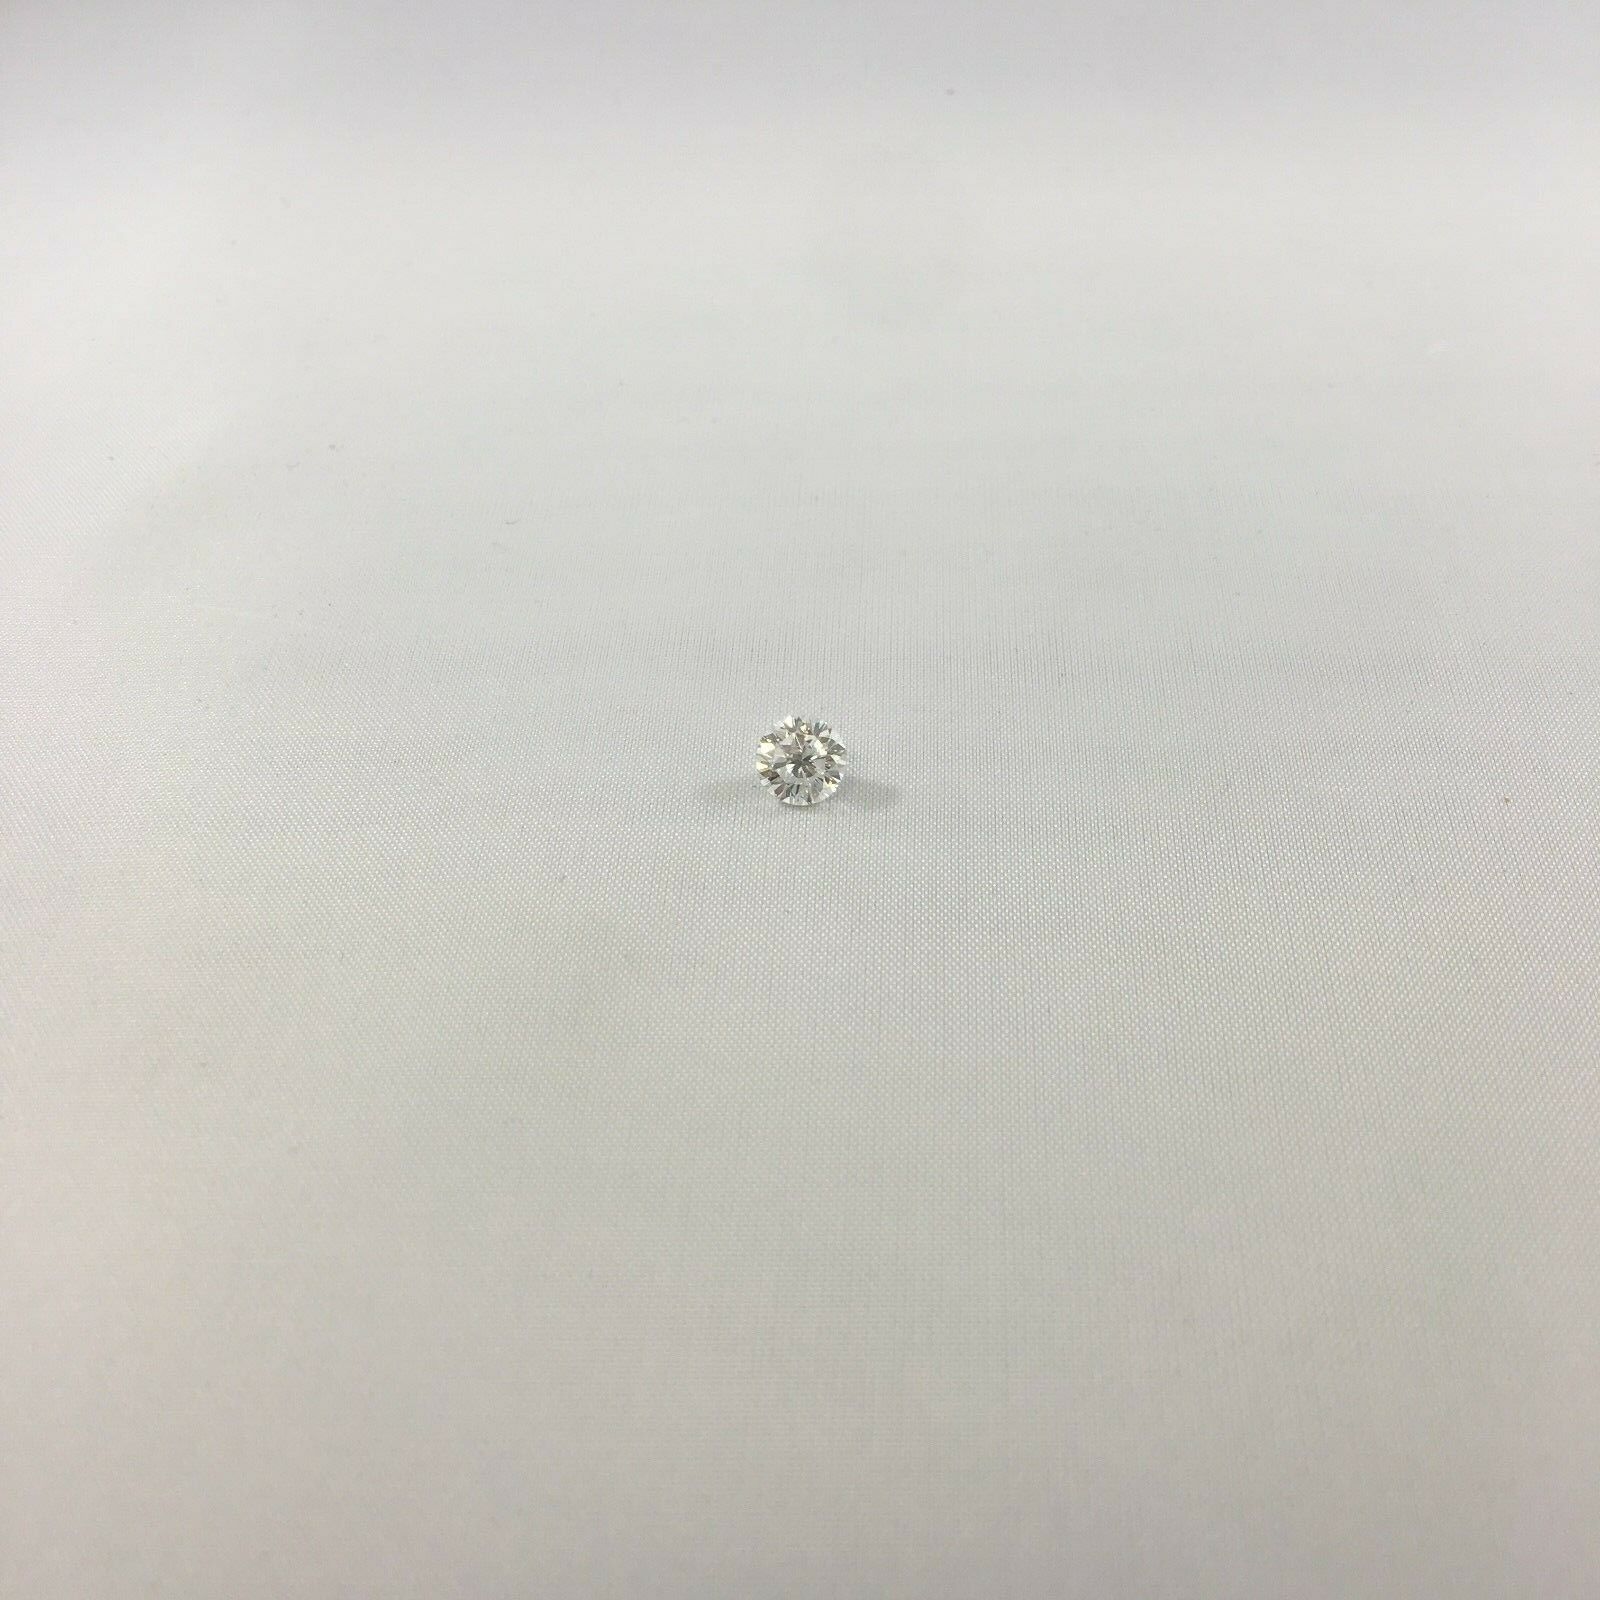 1.07CT GIA Certified - G Color - SI2 - Round Brilliant - Loose Diamond